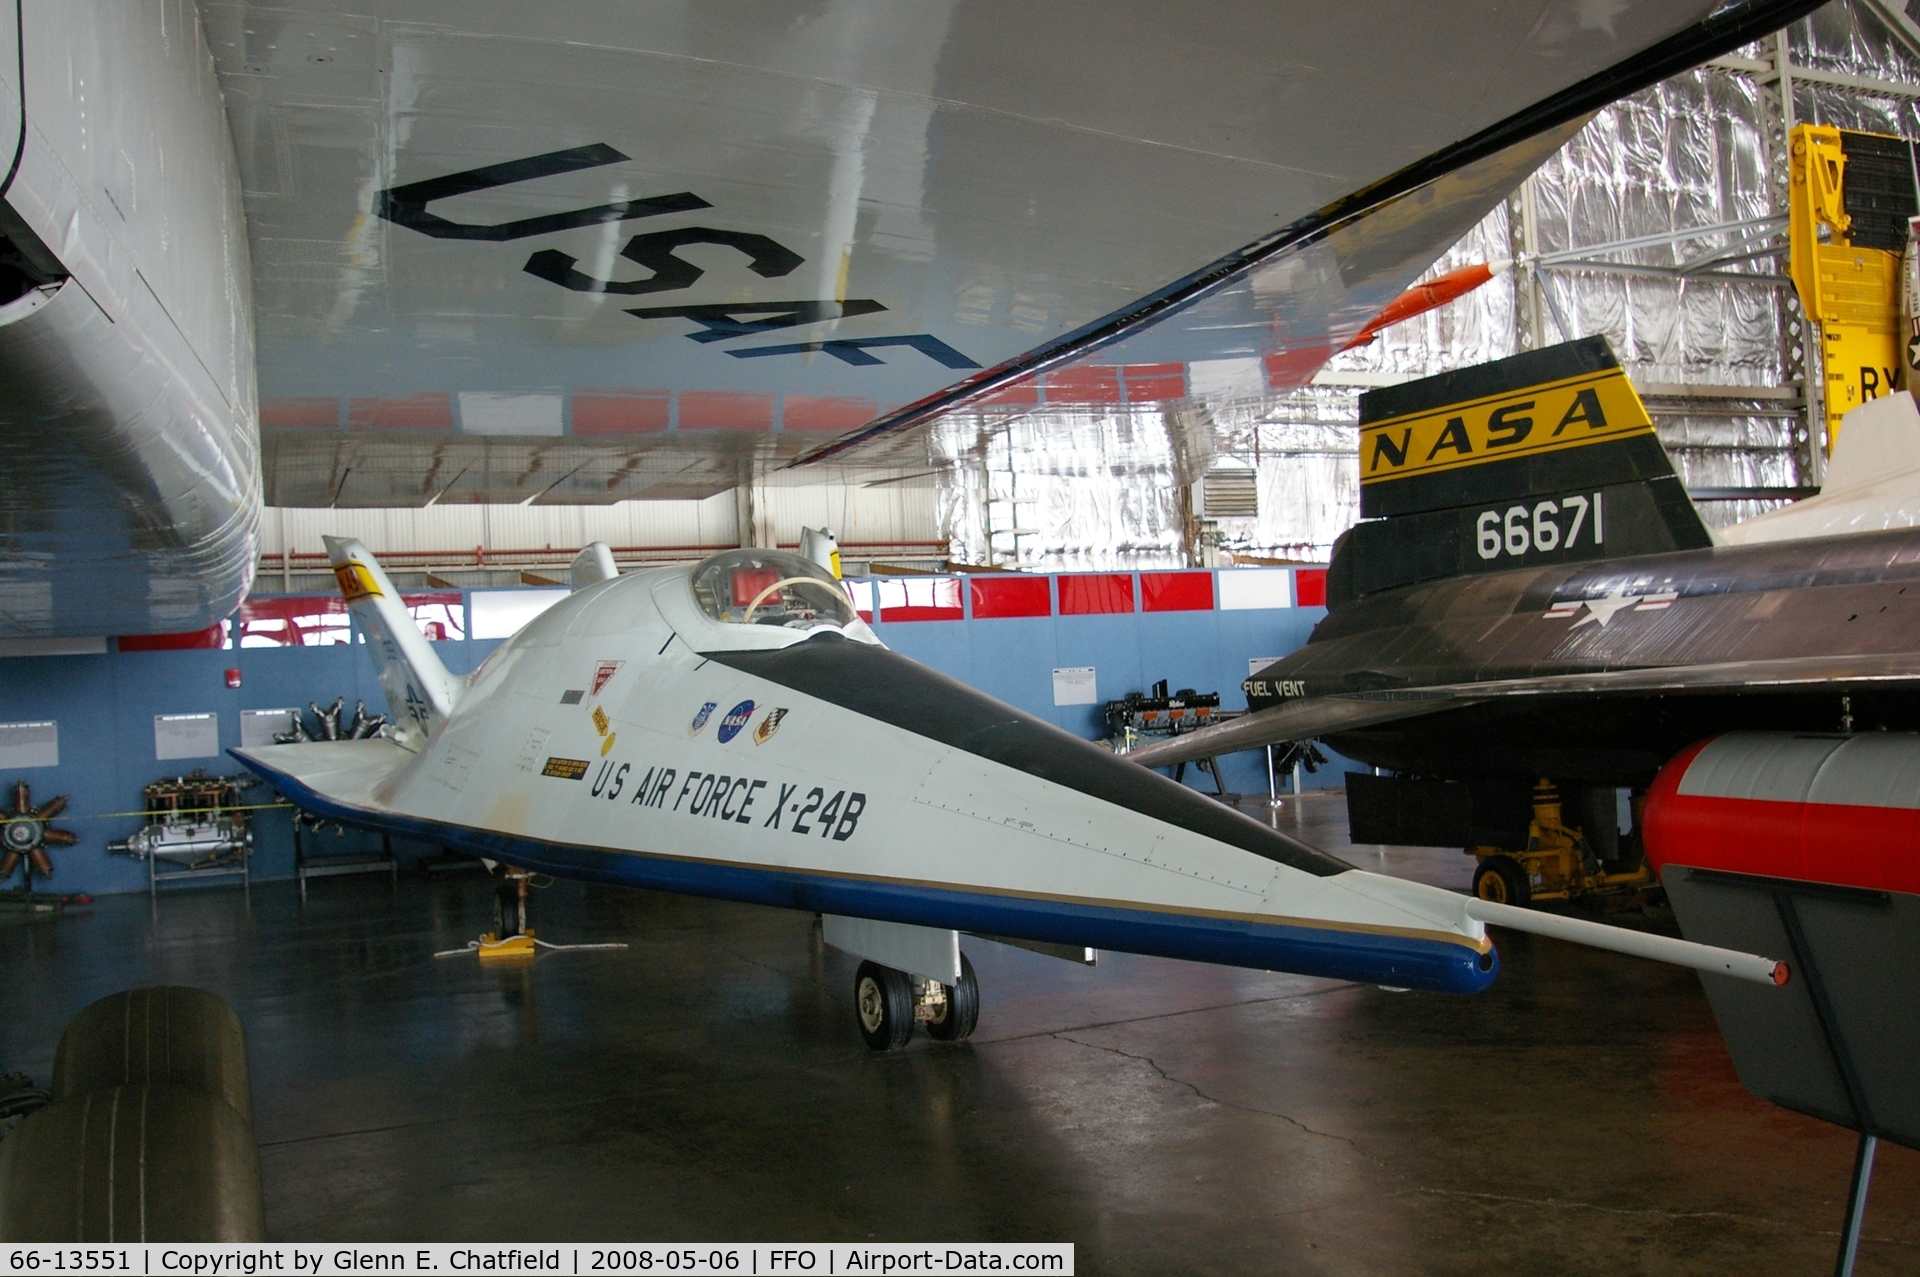 66-13551, 1972 Martin Marietta X-24B C/N Not found, Displayed at the National Museum of the U.S. Air Force